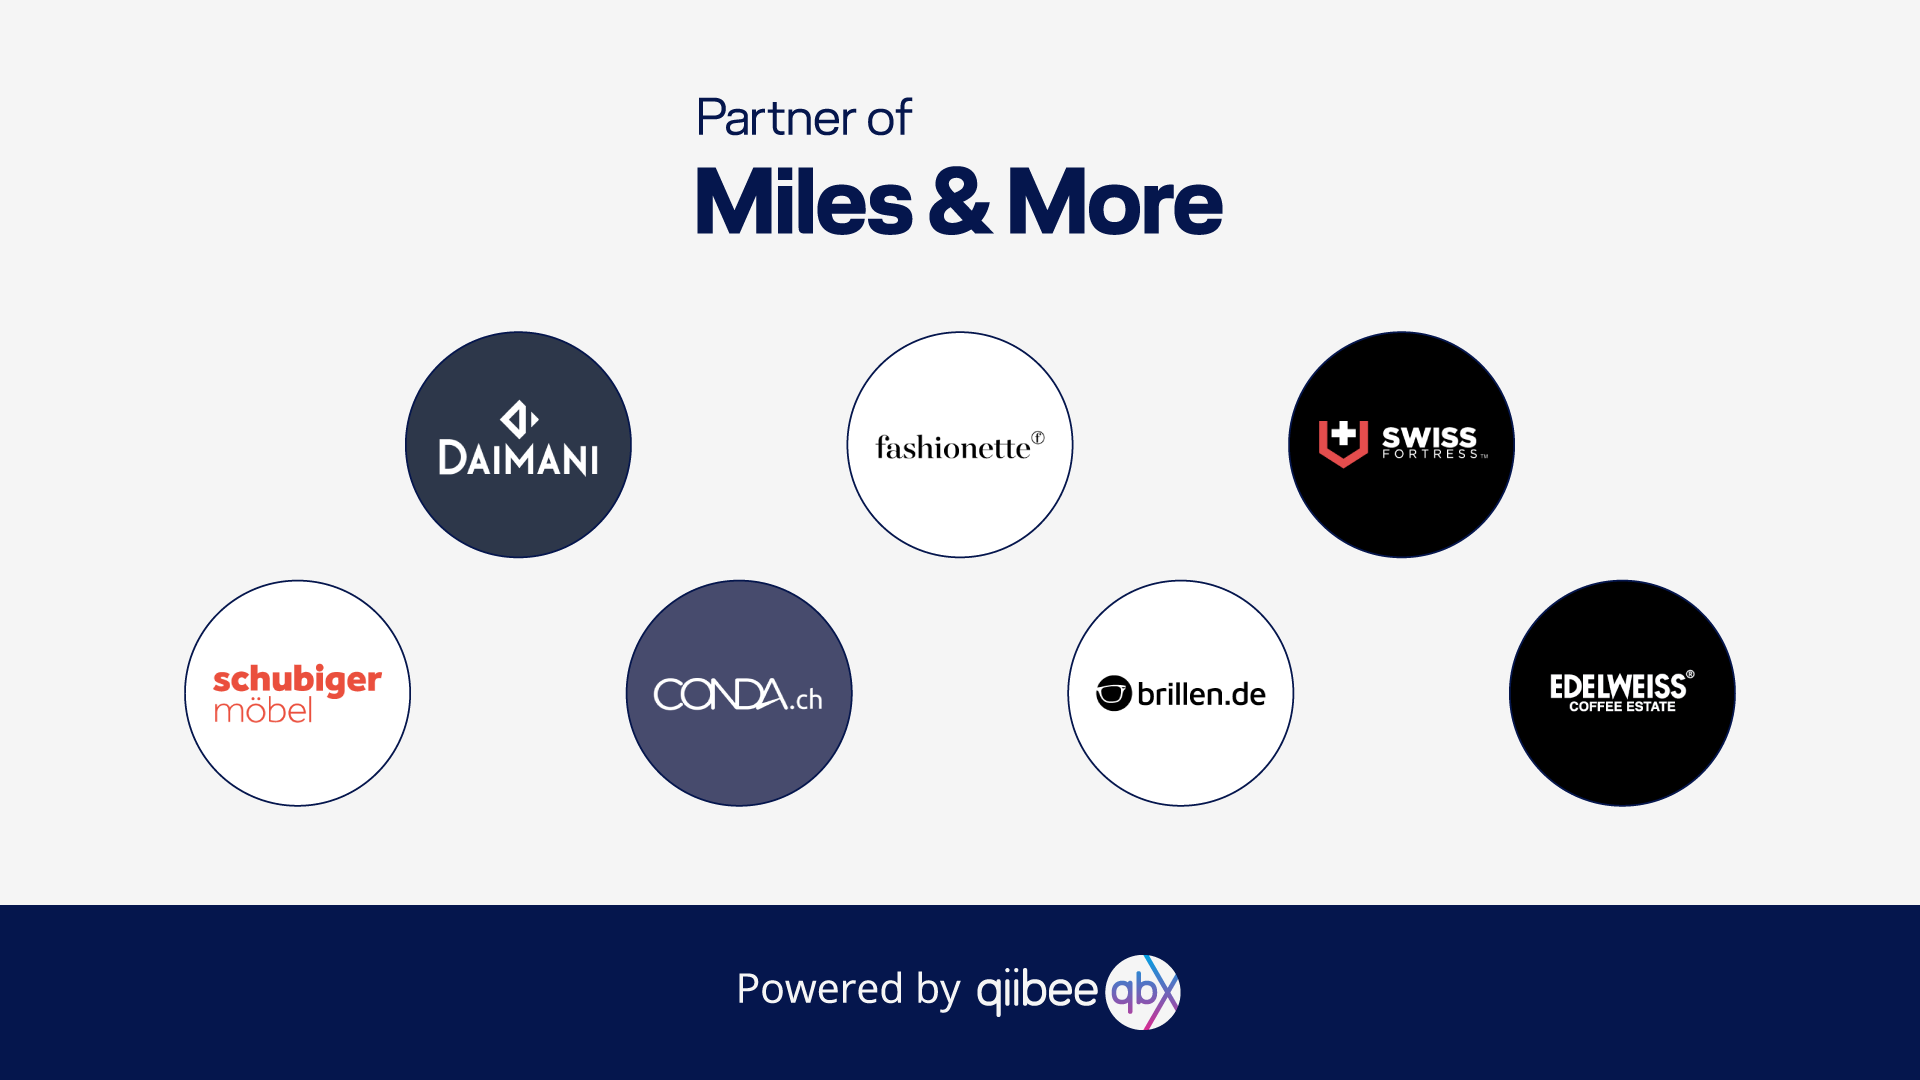 Miles & More launches partnership with qiibee